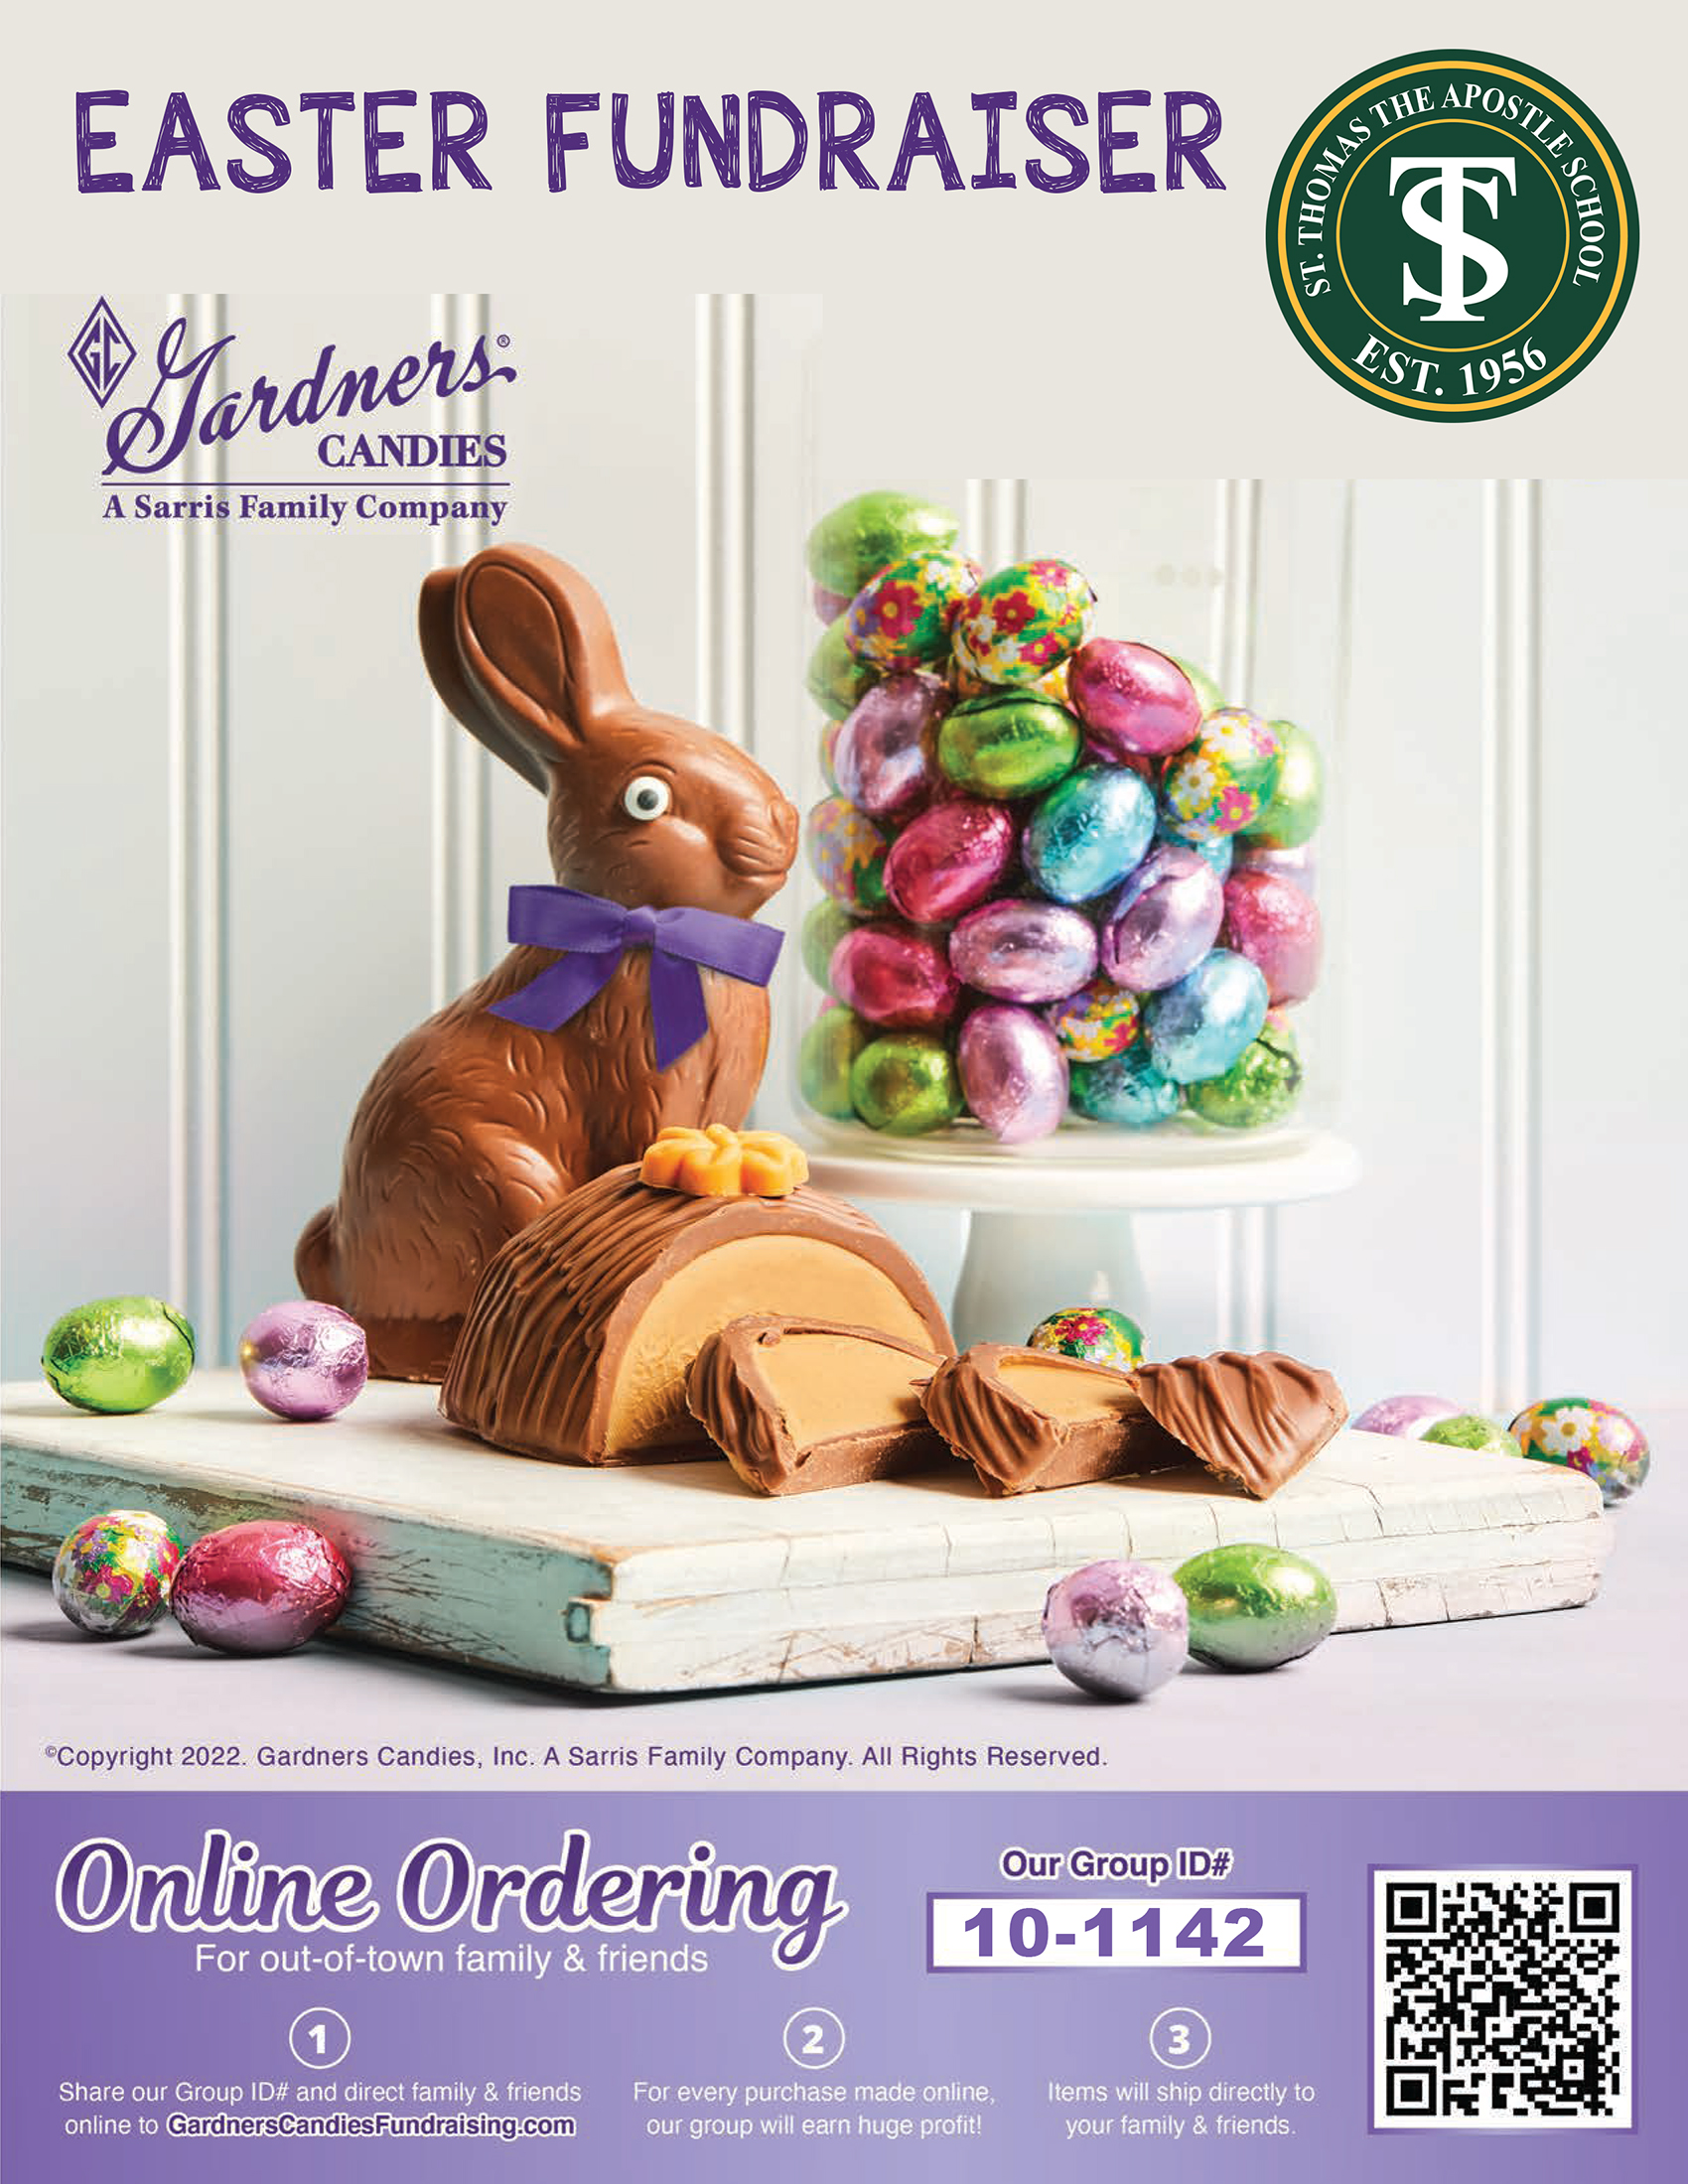 Shop Our Easter Fundraiser!